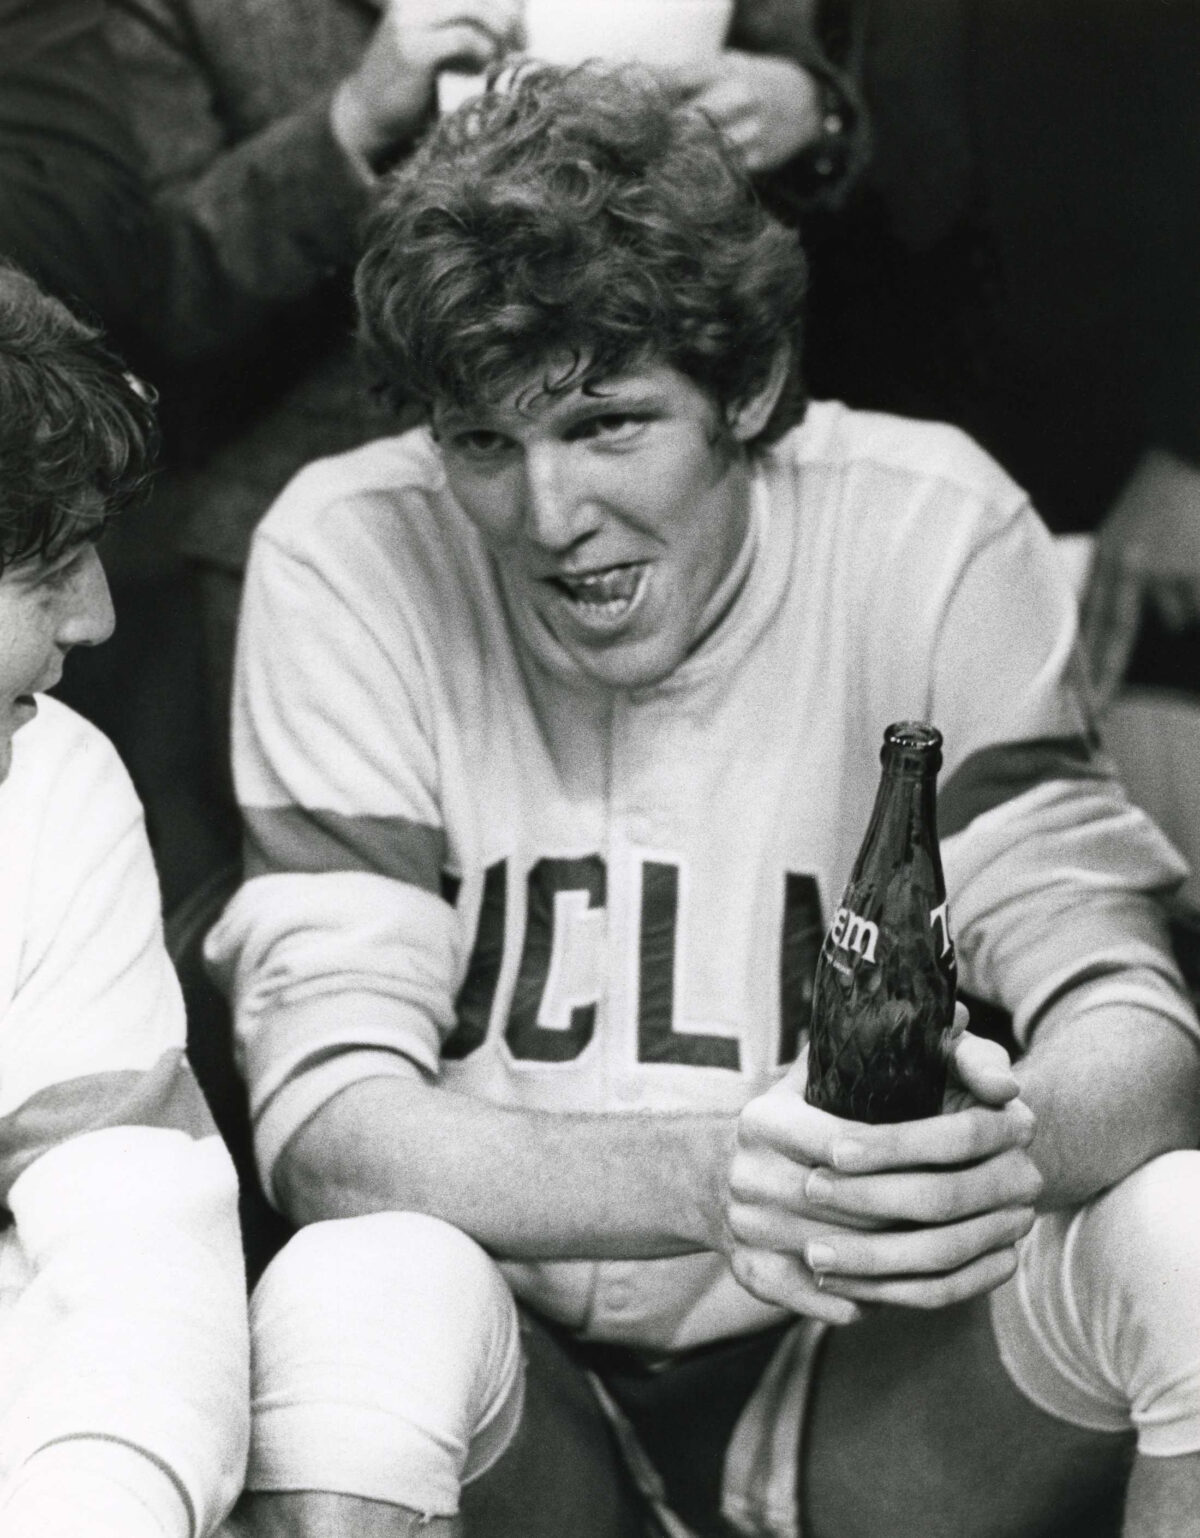 Photos from Bill Walton’s career with the UCLA Bruins